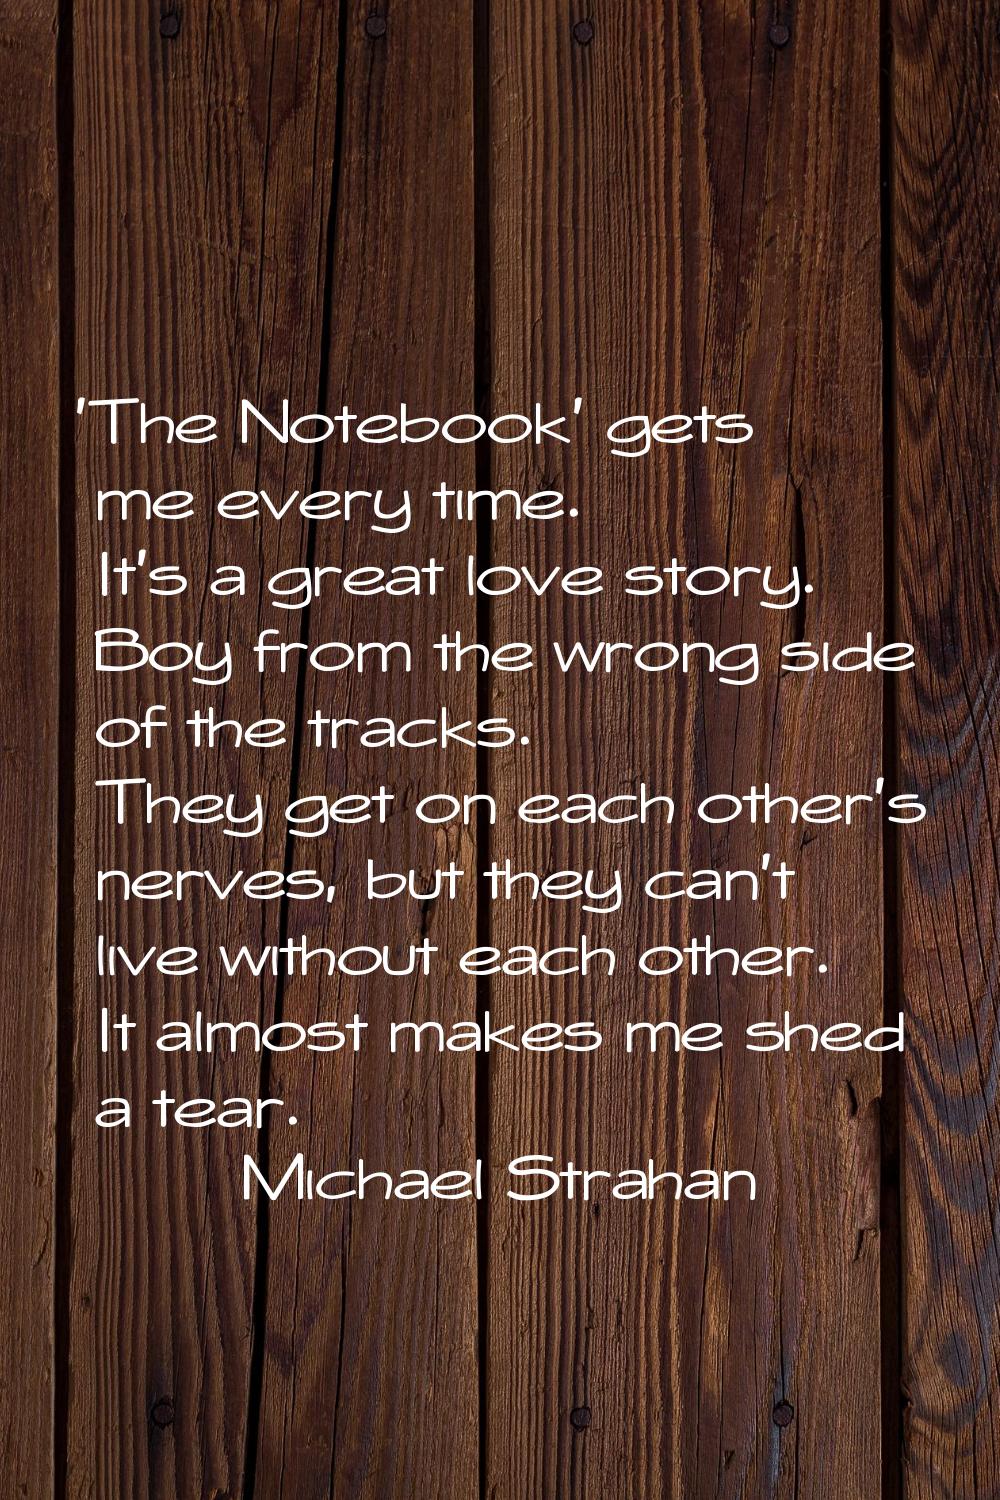 'The Notebook' gets me every time. It's a great love story. Boy from the wrong side of the tracks. 